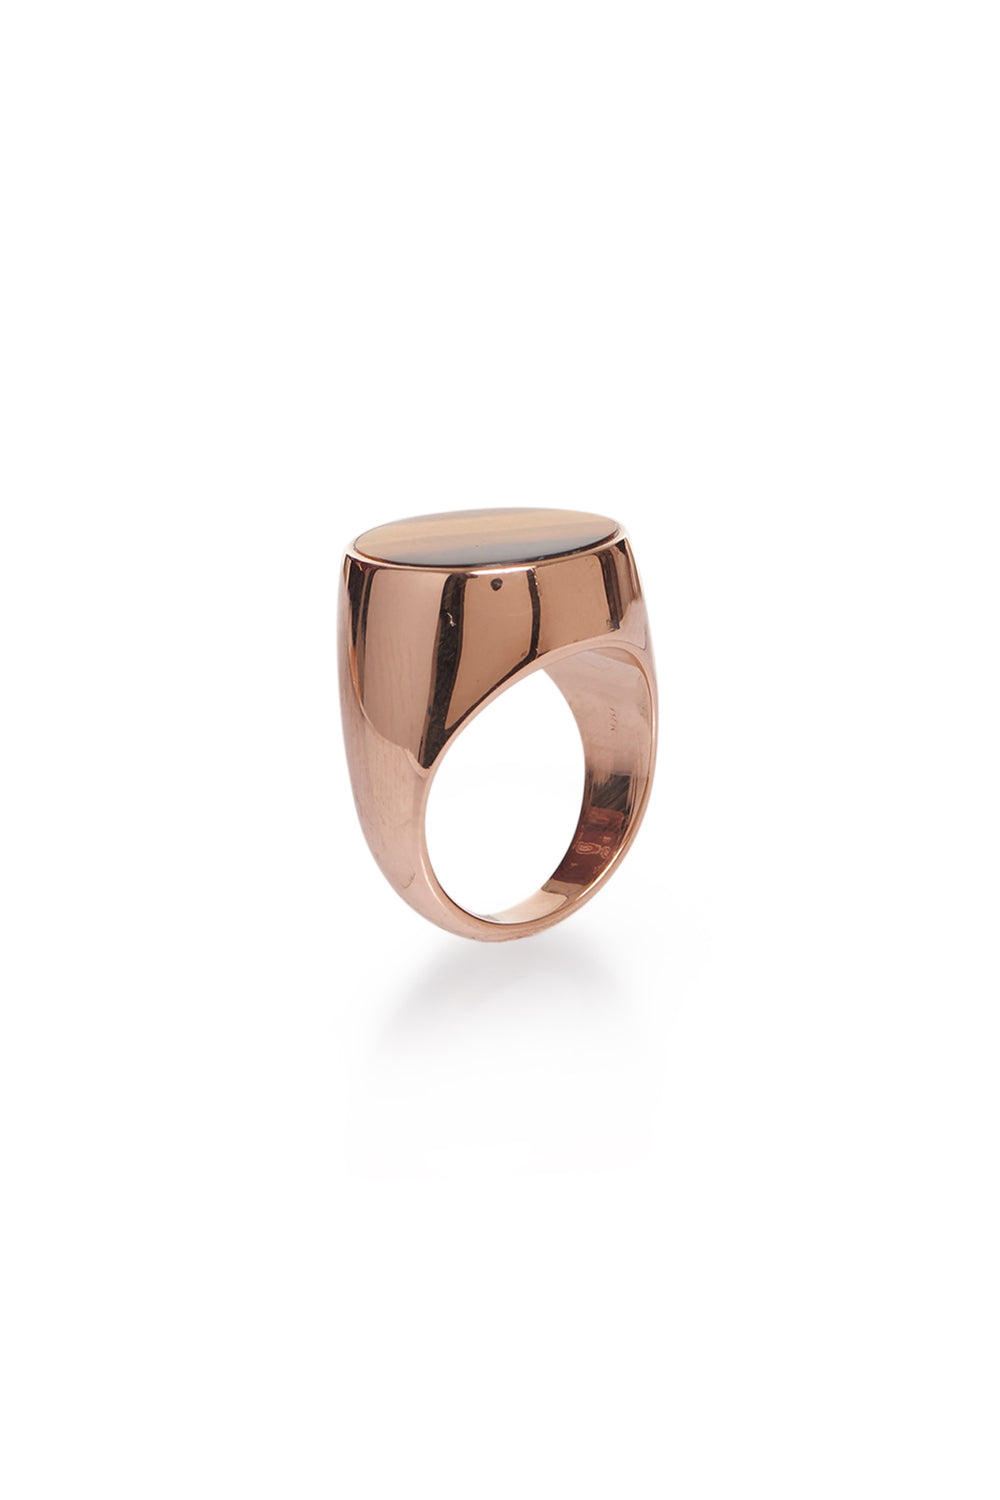 One Ounce” Signet Ring In Rose Gold & Tiger's Eye – Gabriela Hearst